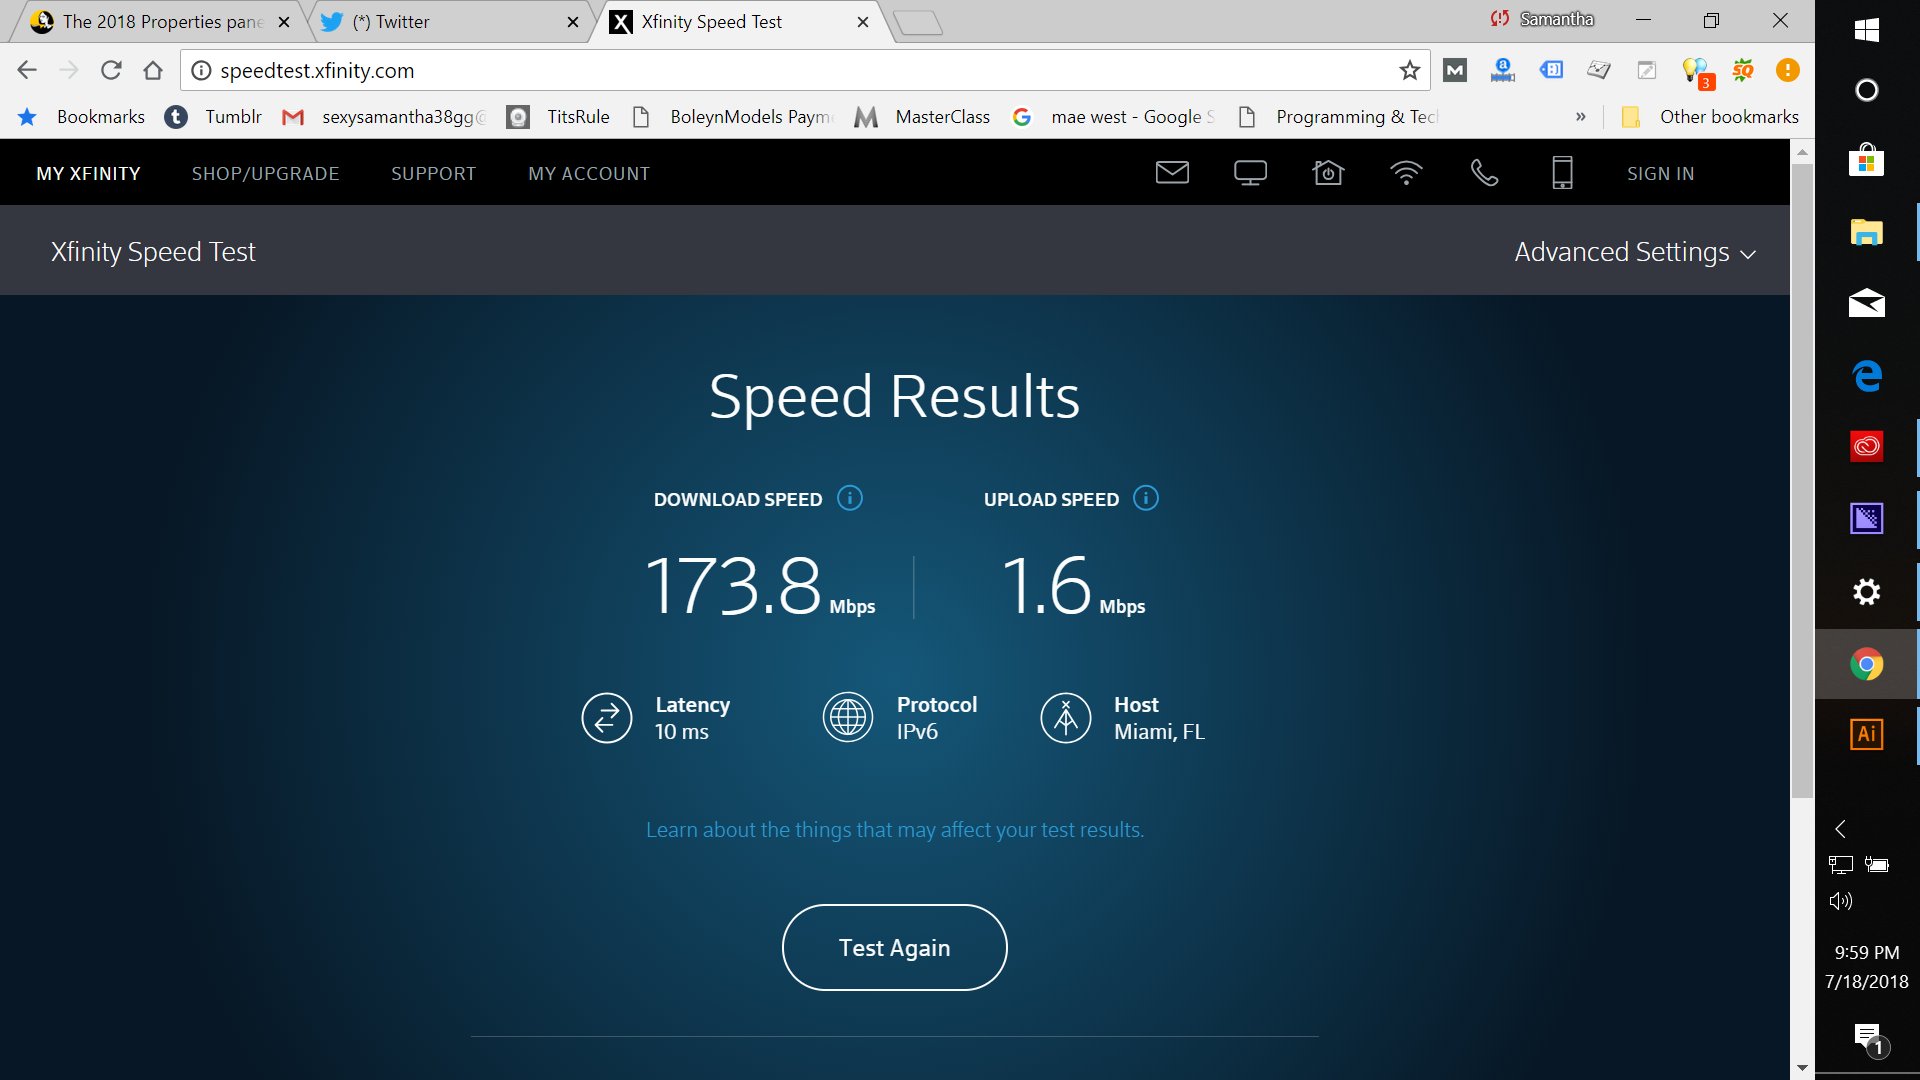 Still obsessed with my upload speed which is clearly LAME! https://t.co/R5tagiiDy3